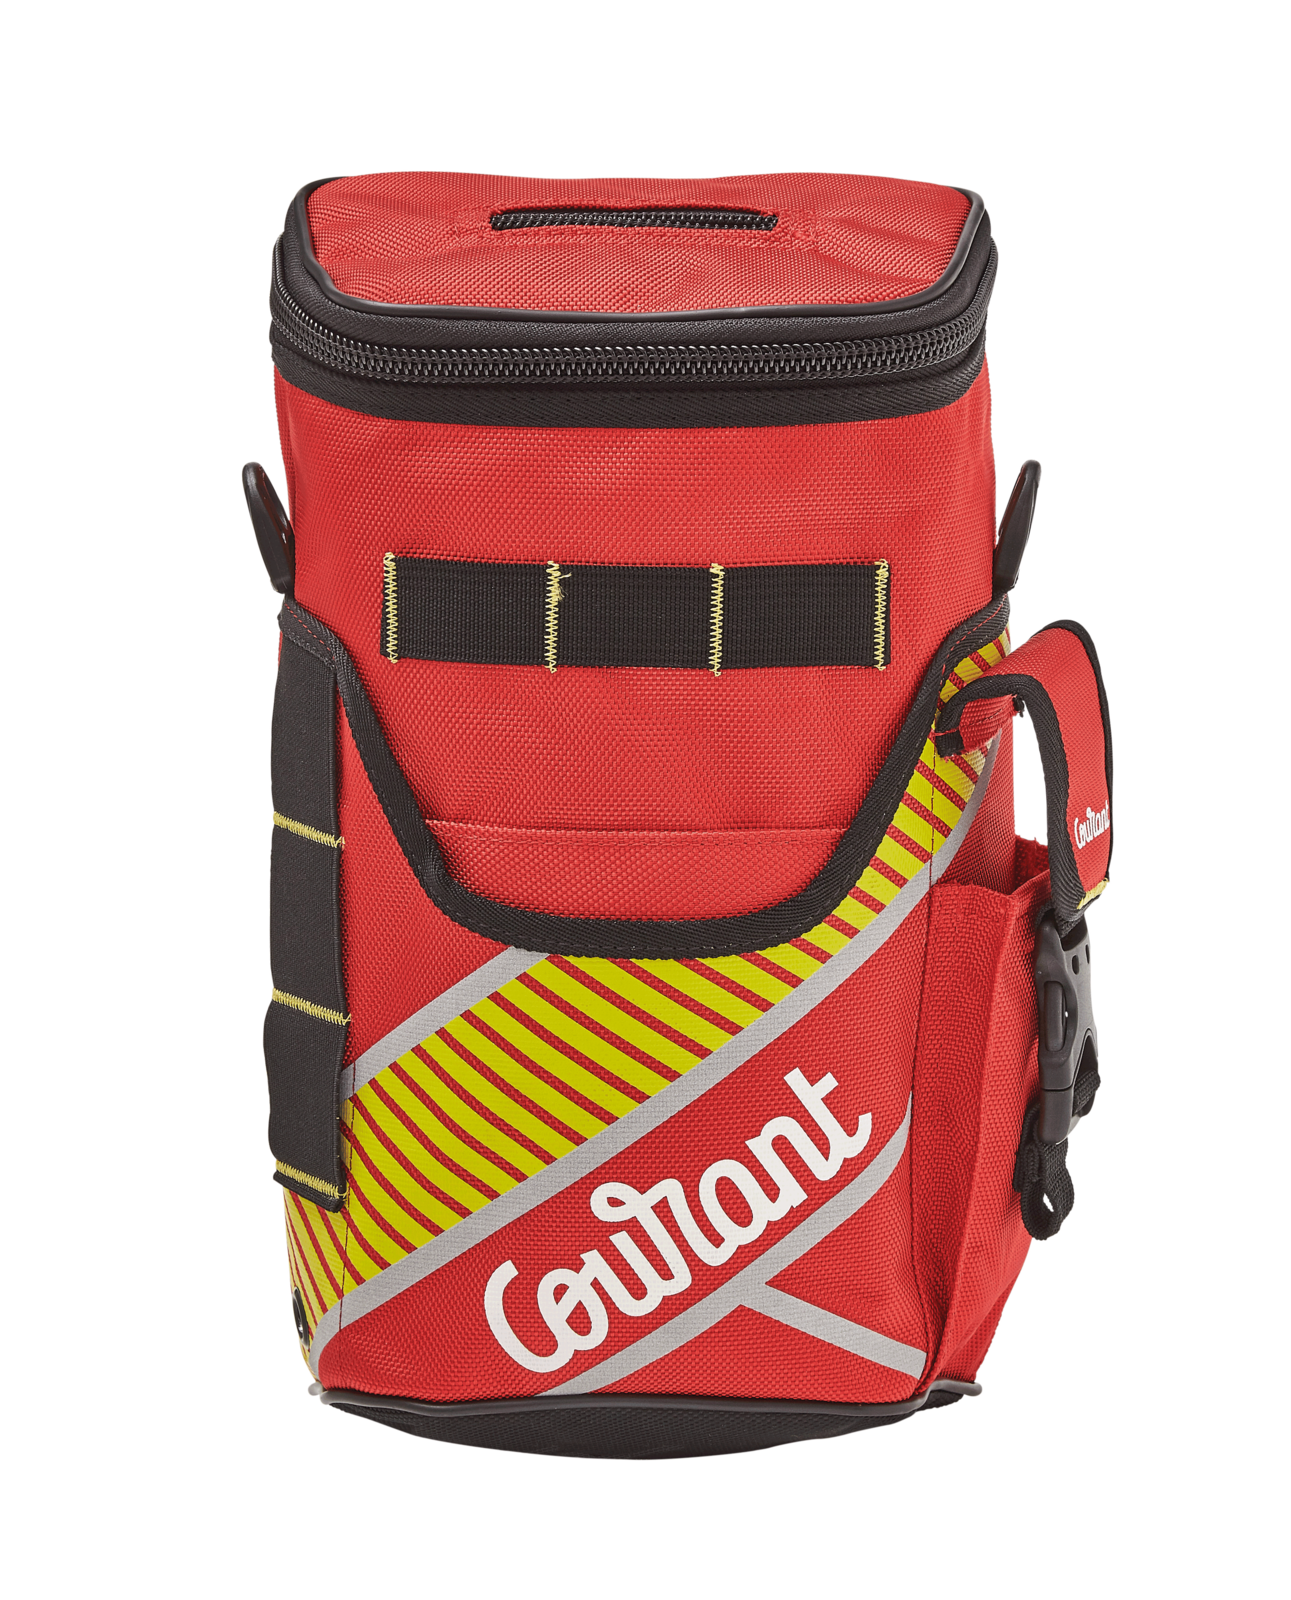 Courant Faster Bag for 100m Guide Line